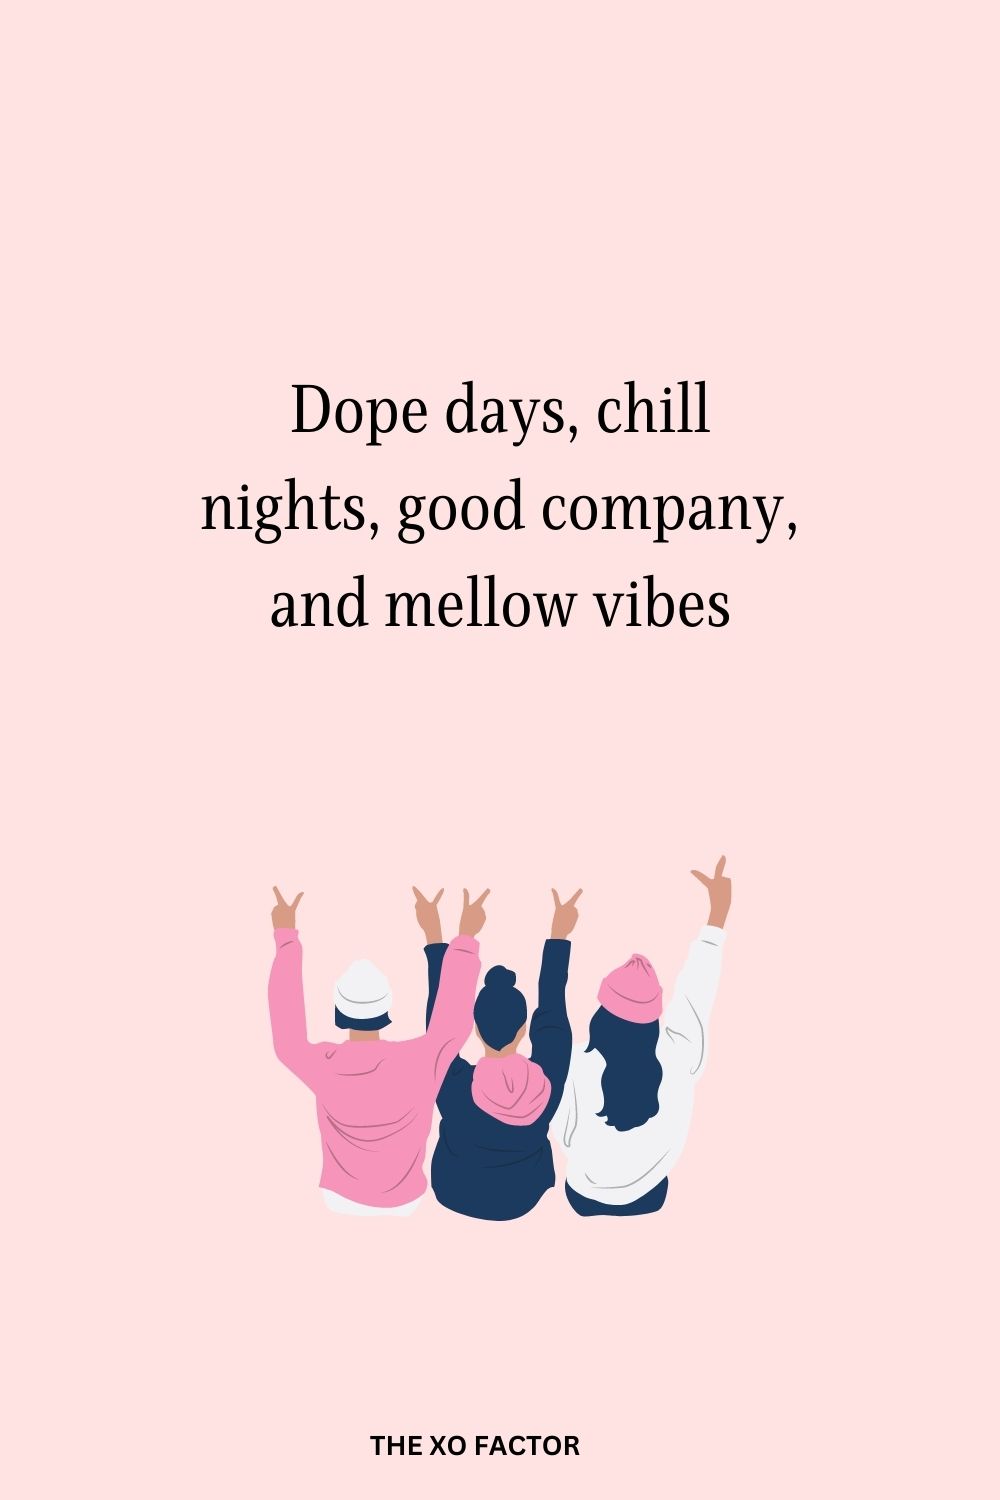 Dope days, chill nights, good company, and mellow vibes